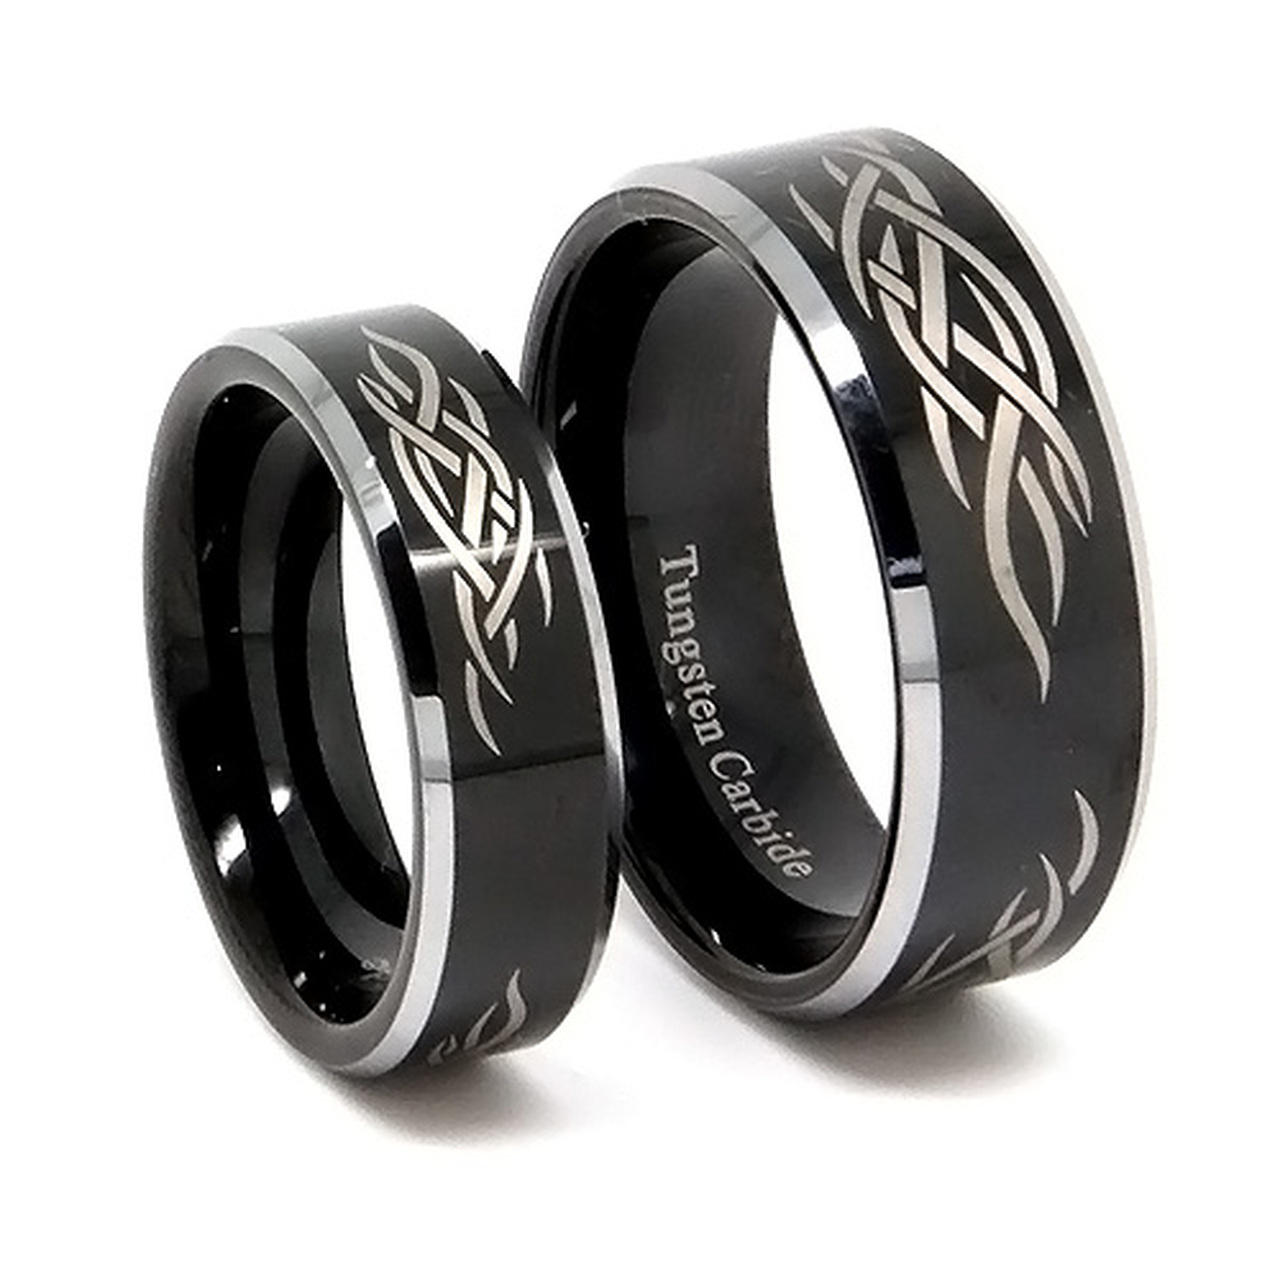 Black Tungsten Wedding Band Set, Titanium Top Matching Rings, Laser Tribal  Design, 8MM and 6MM - Tungsten Ring Direct